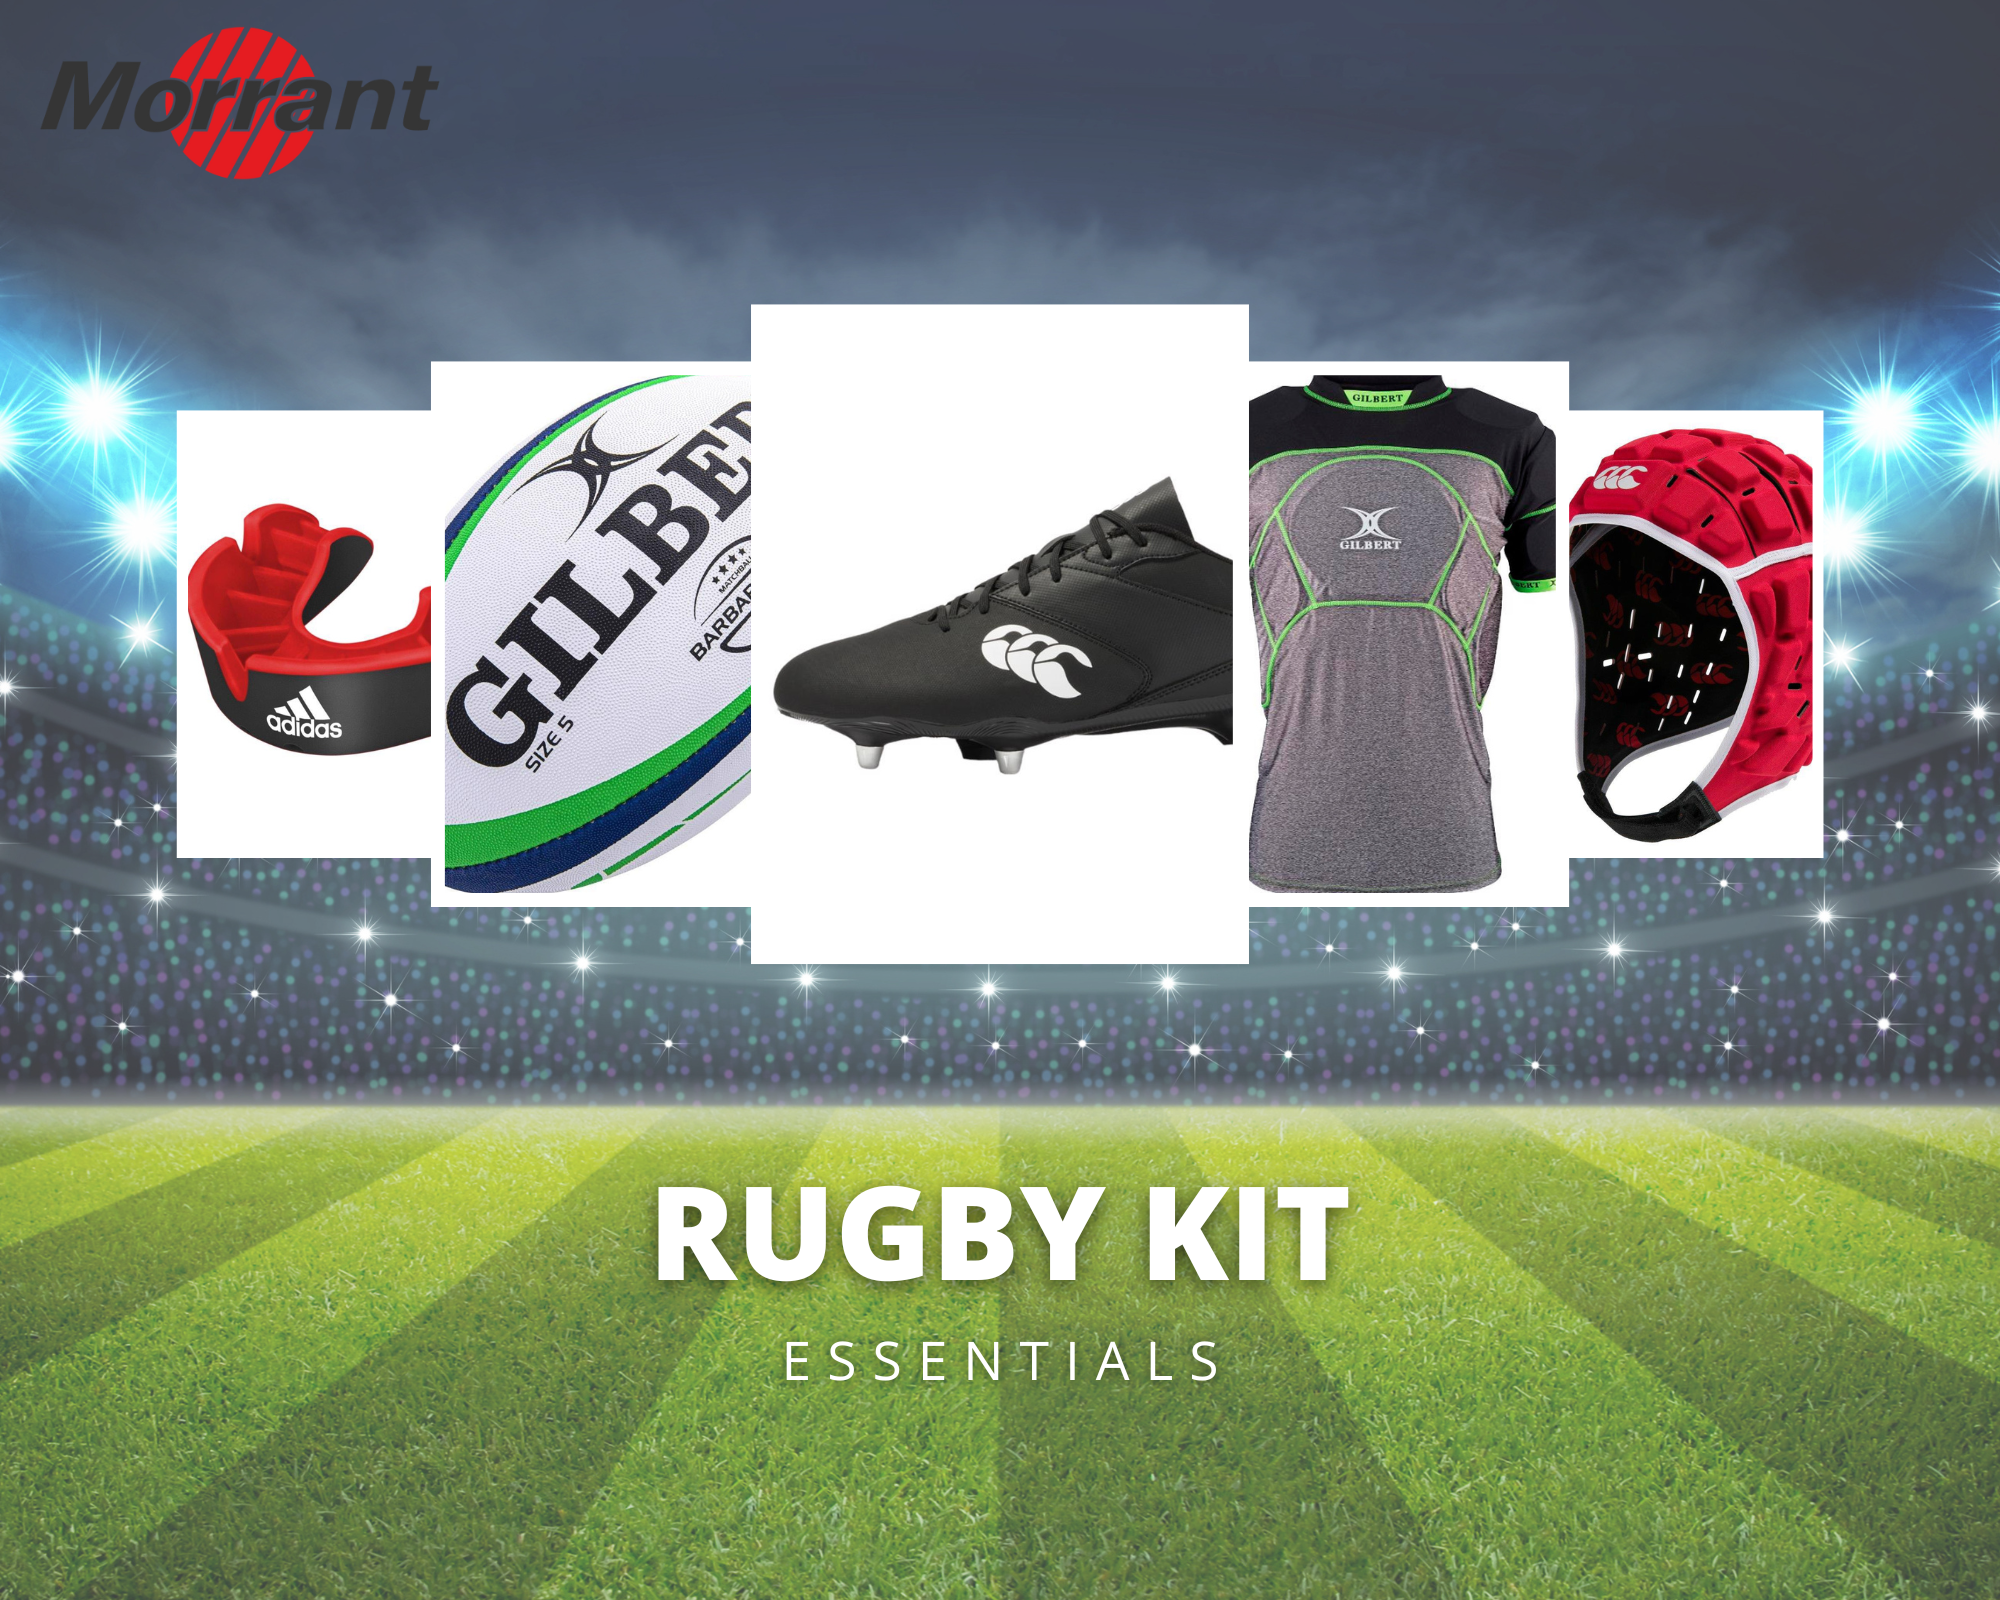 Morrant rugby kit essentials1.png